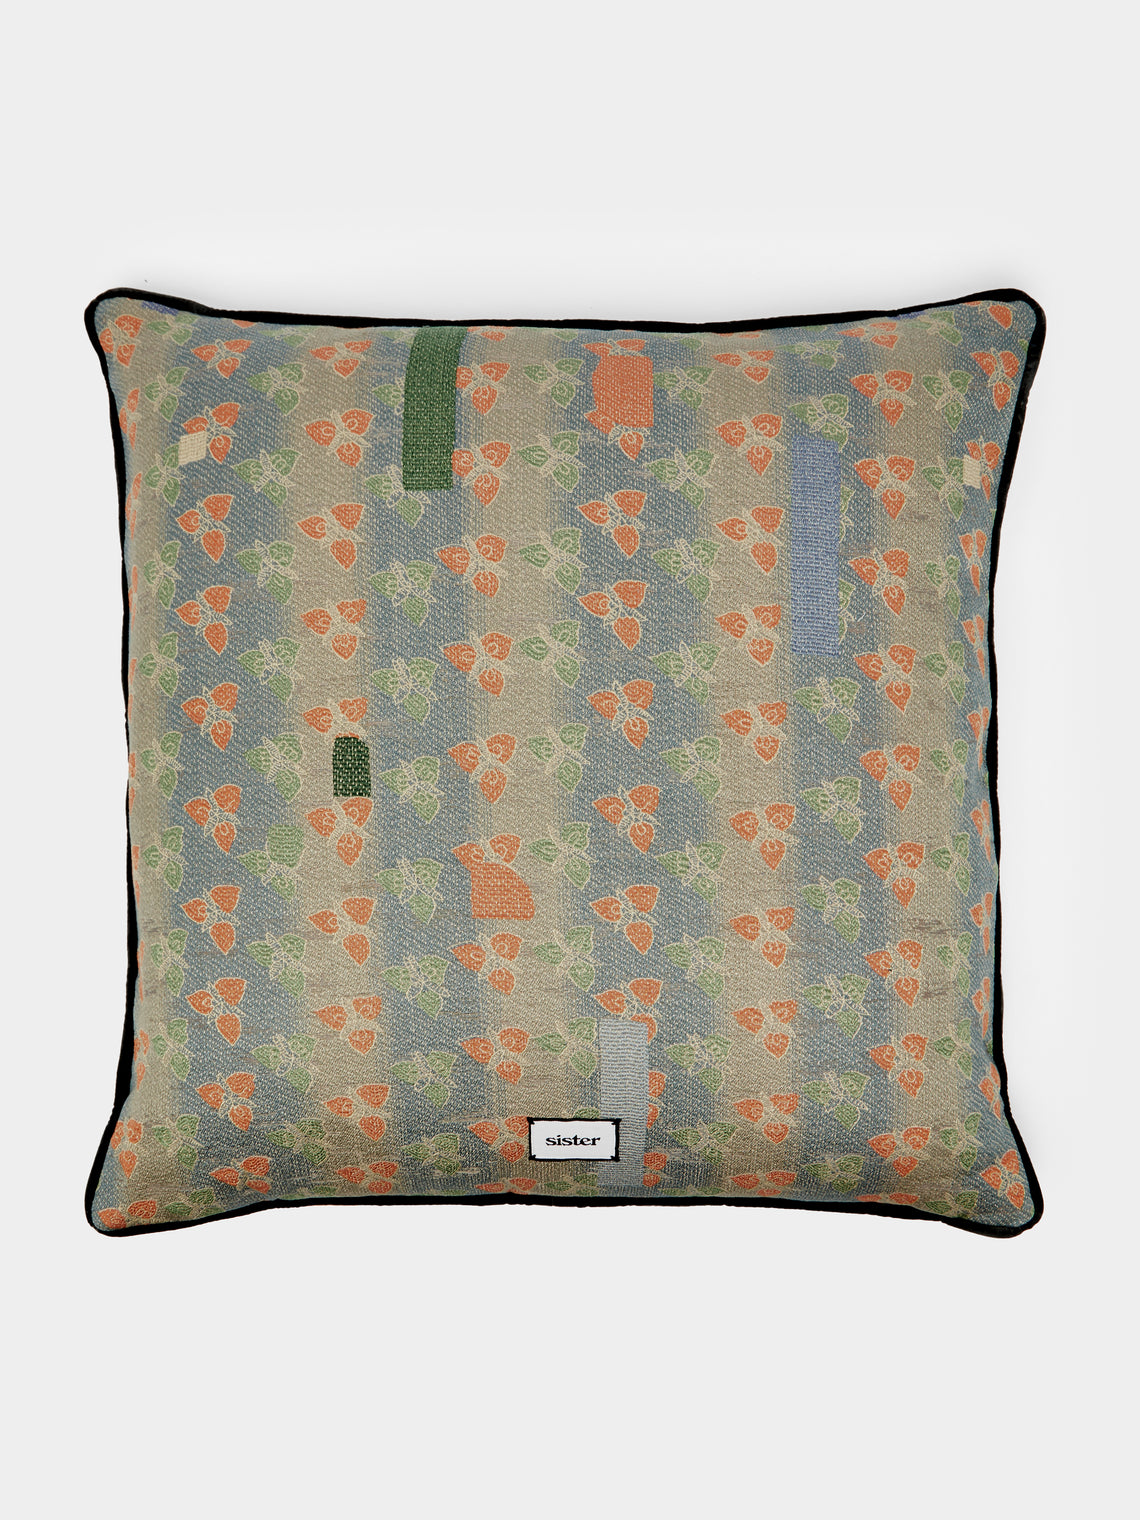 Sister By Studio Ashby - Disa Cotton Cushion -  - ABASK